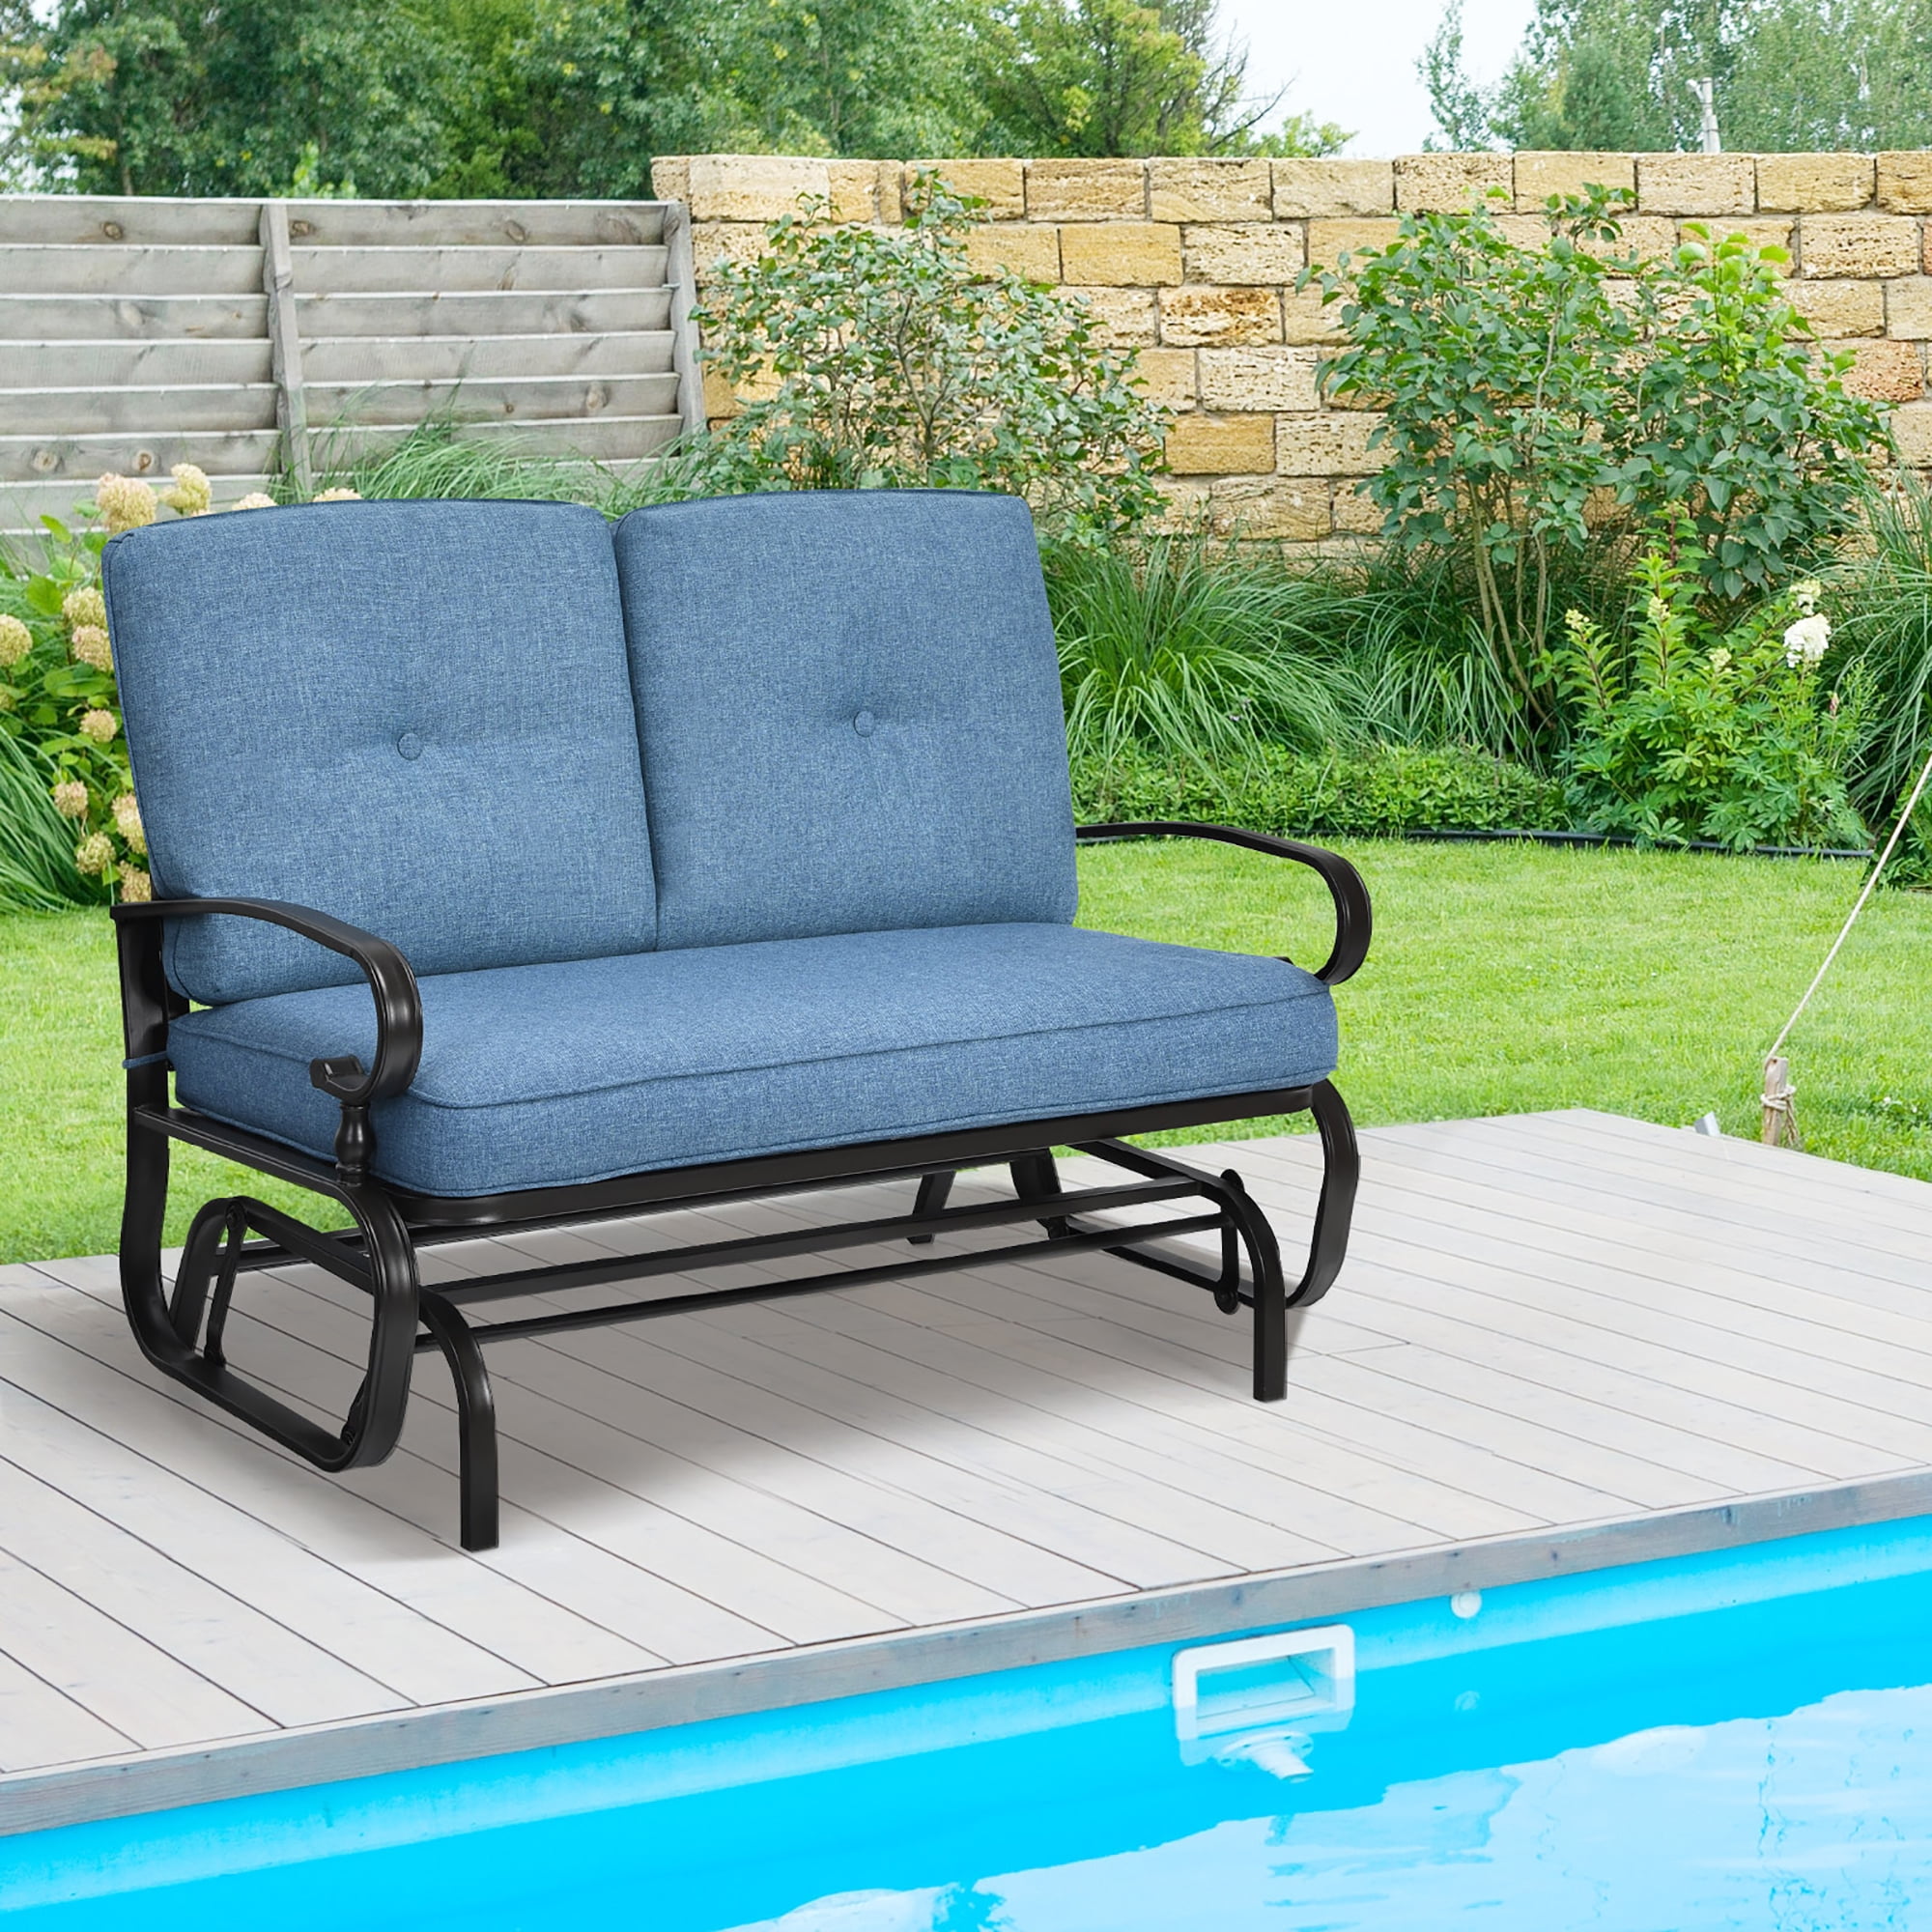 Casart Ergonomic Handwoven Lounge Recliner Outdoor Patio Chaise Chair with Heavy Padded Cushions for Garden Lawn and Poolside 